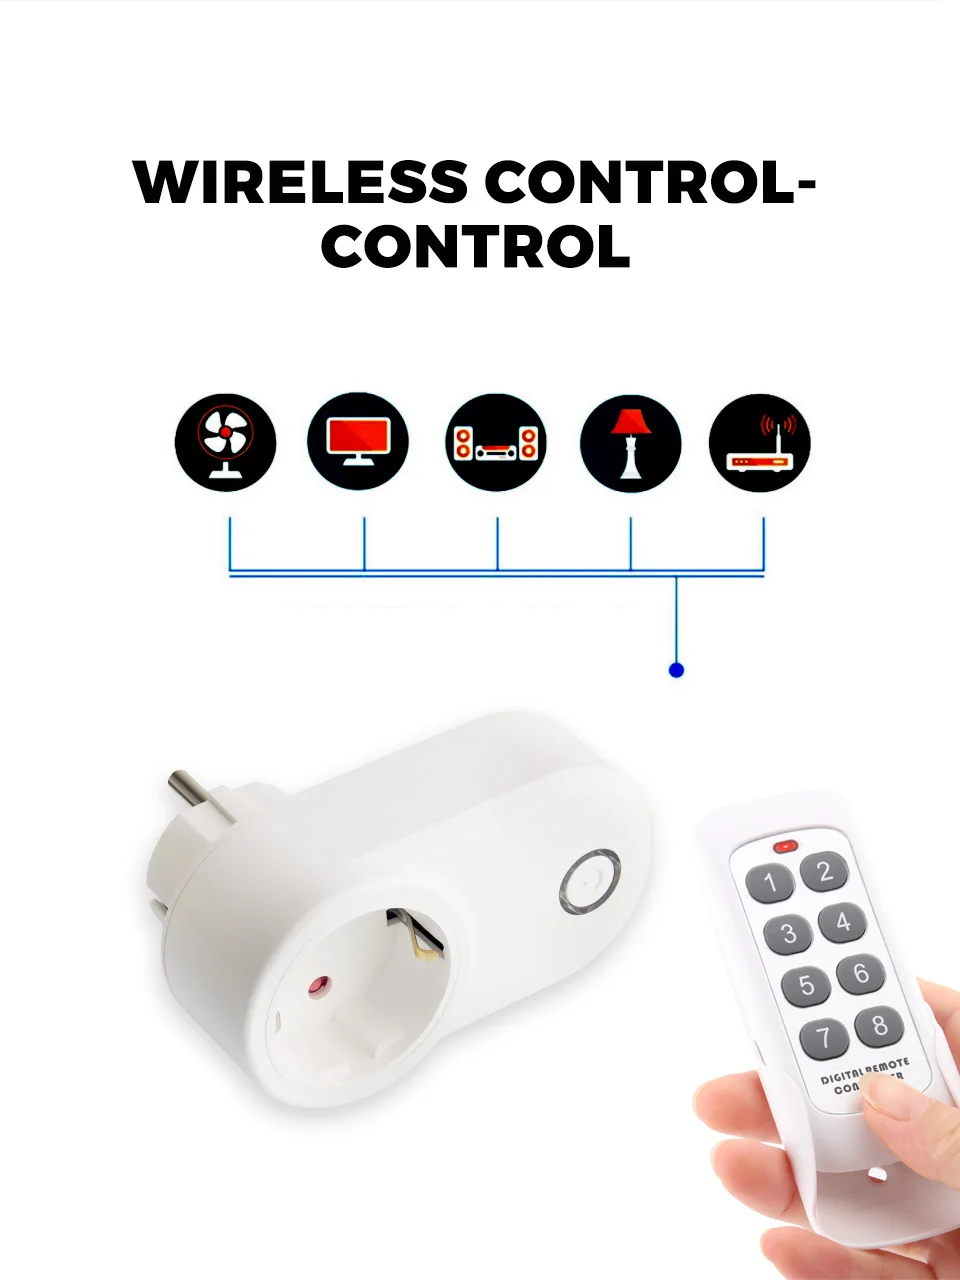 H23883166aa3640b99880ba2490ae1fcfq SMATRUL Wireless Remote Control Smart Socket 15A EU FR Universal Plug 433mhz Wall Programmable Electrical Outlet Switch 220v LED